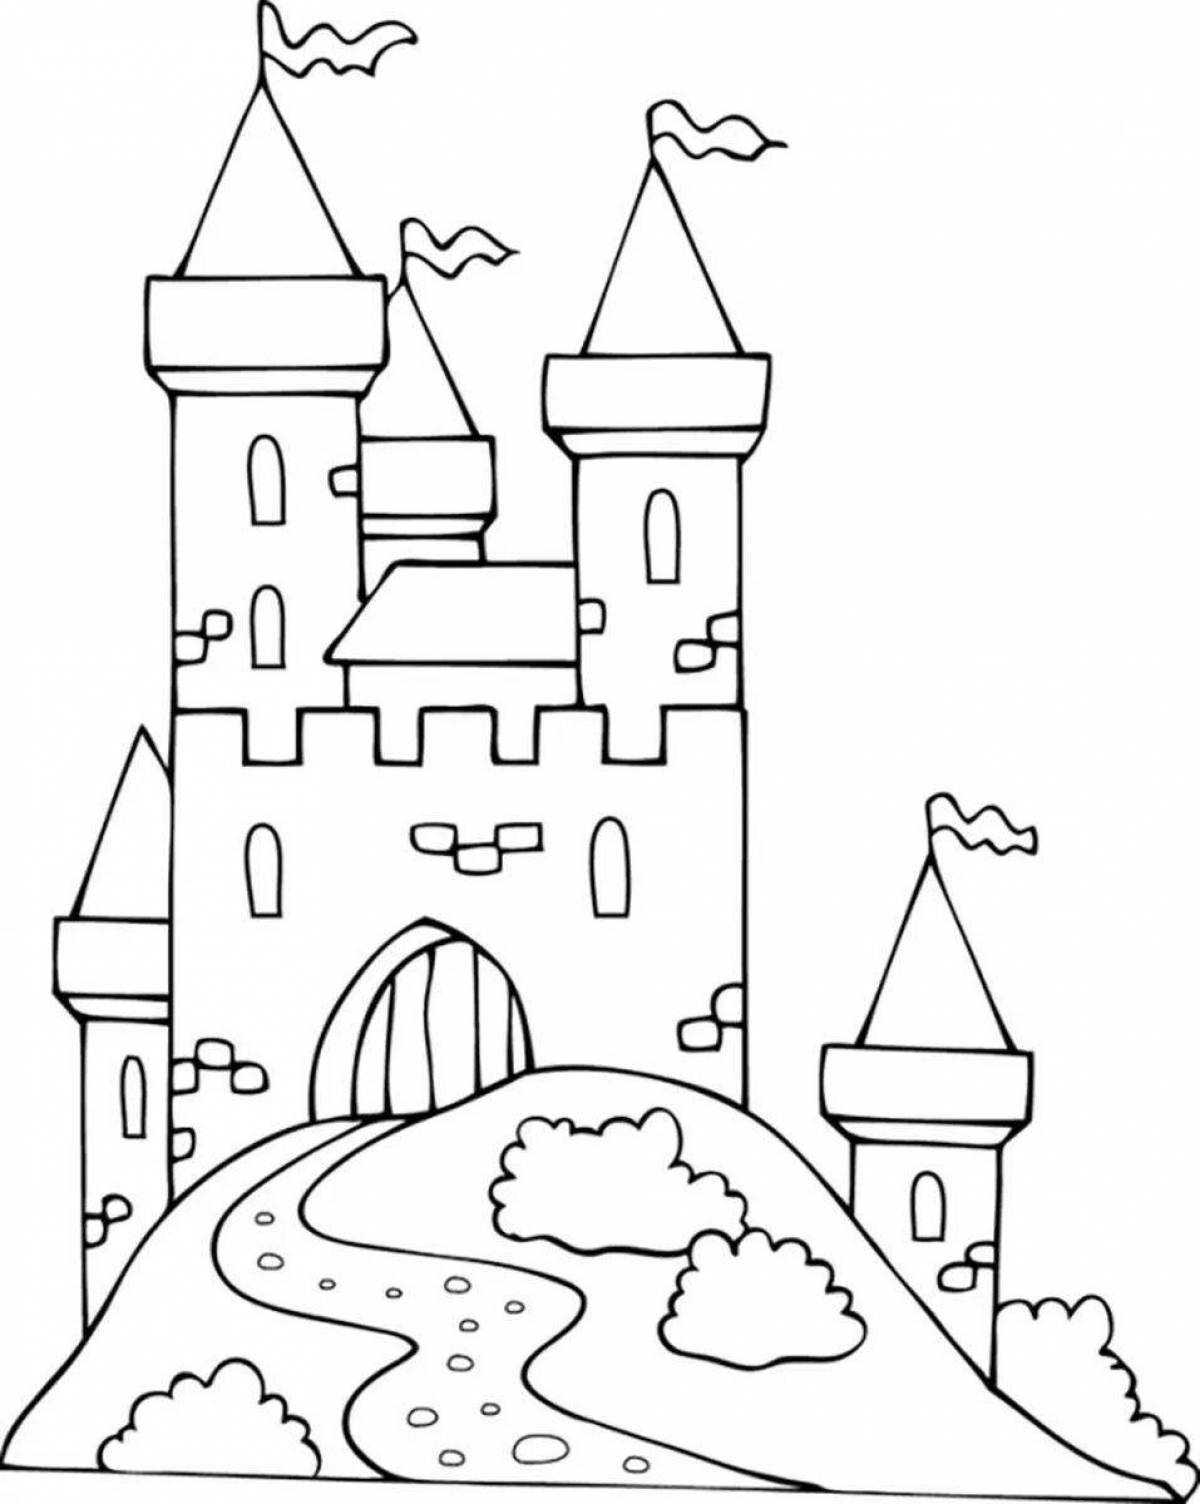 Fun castle coloring book for 4-5 year olds